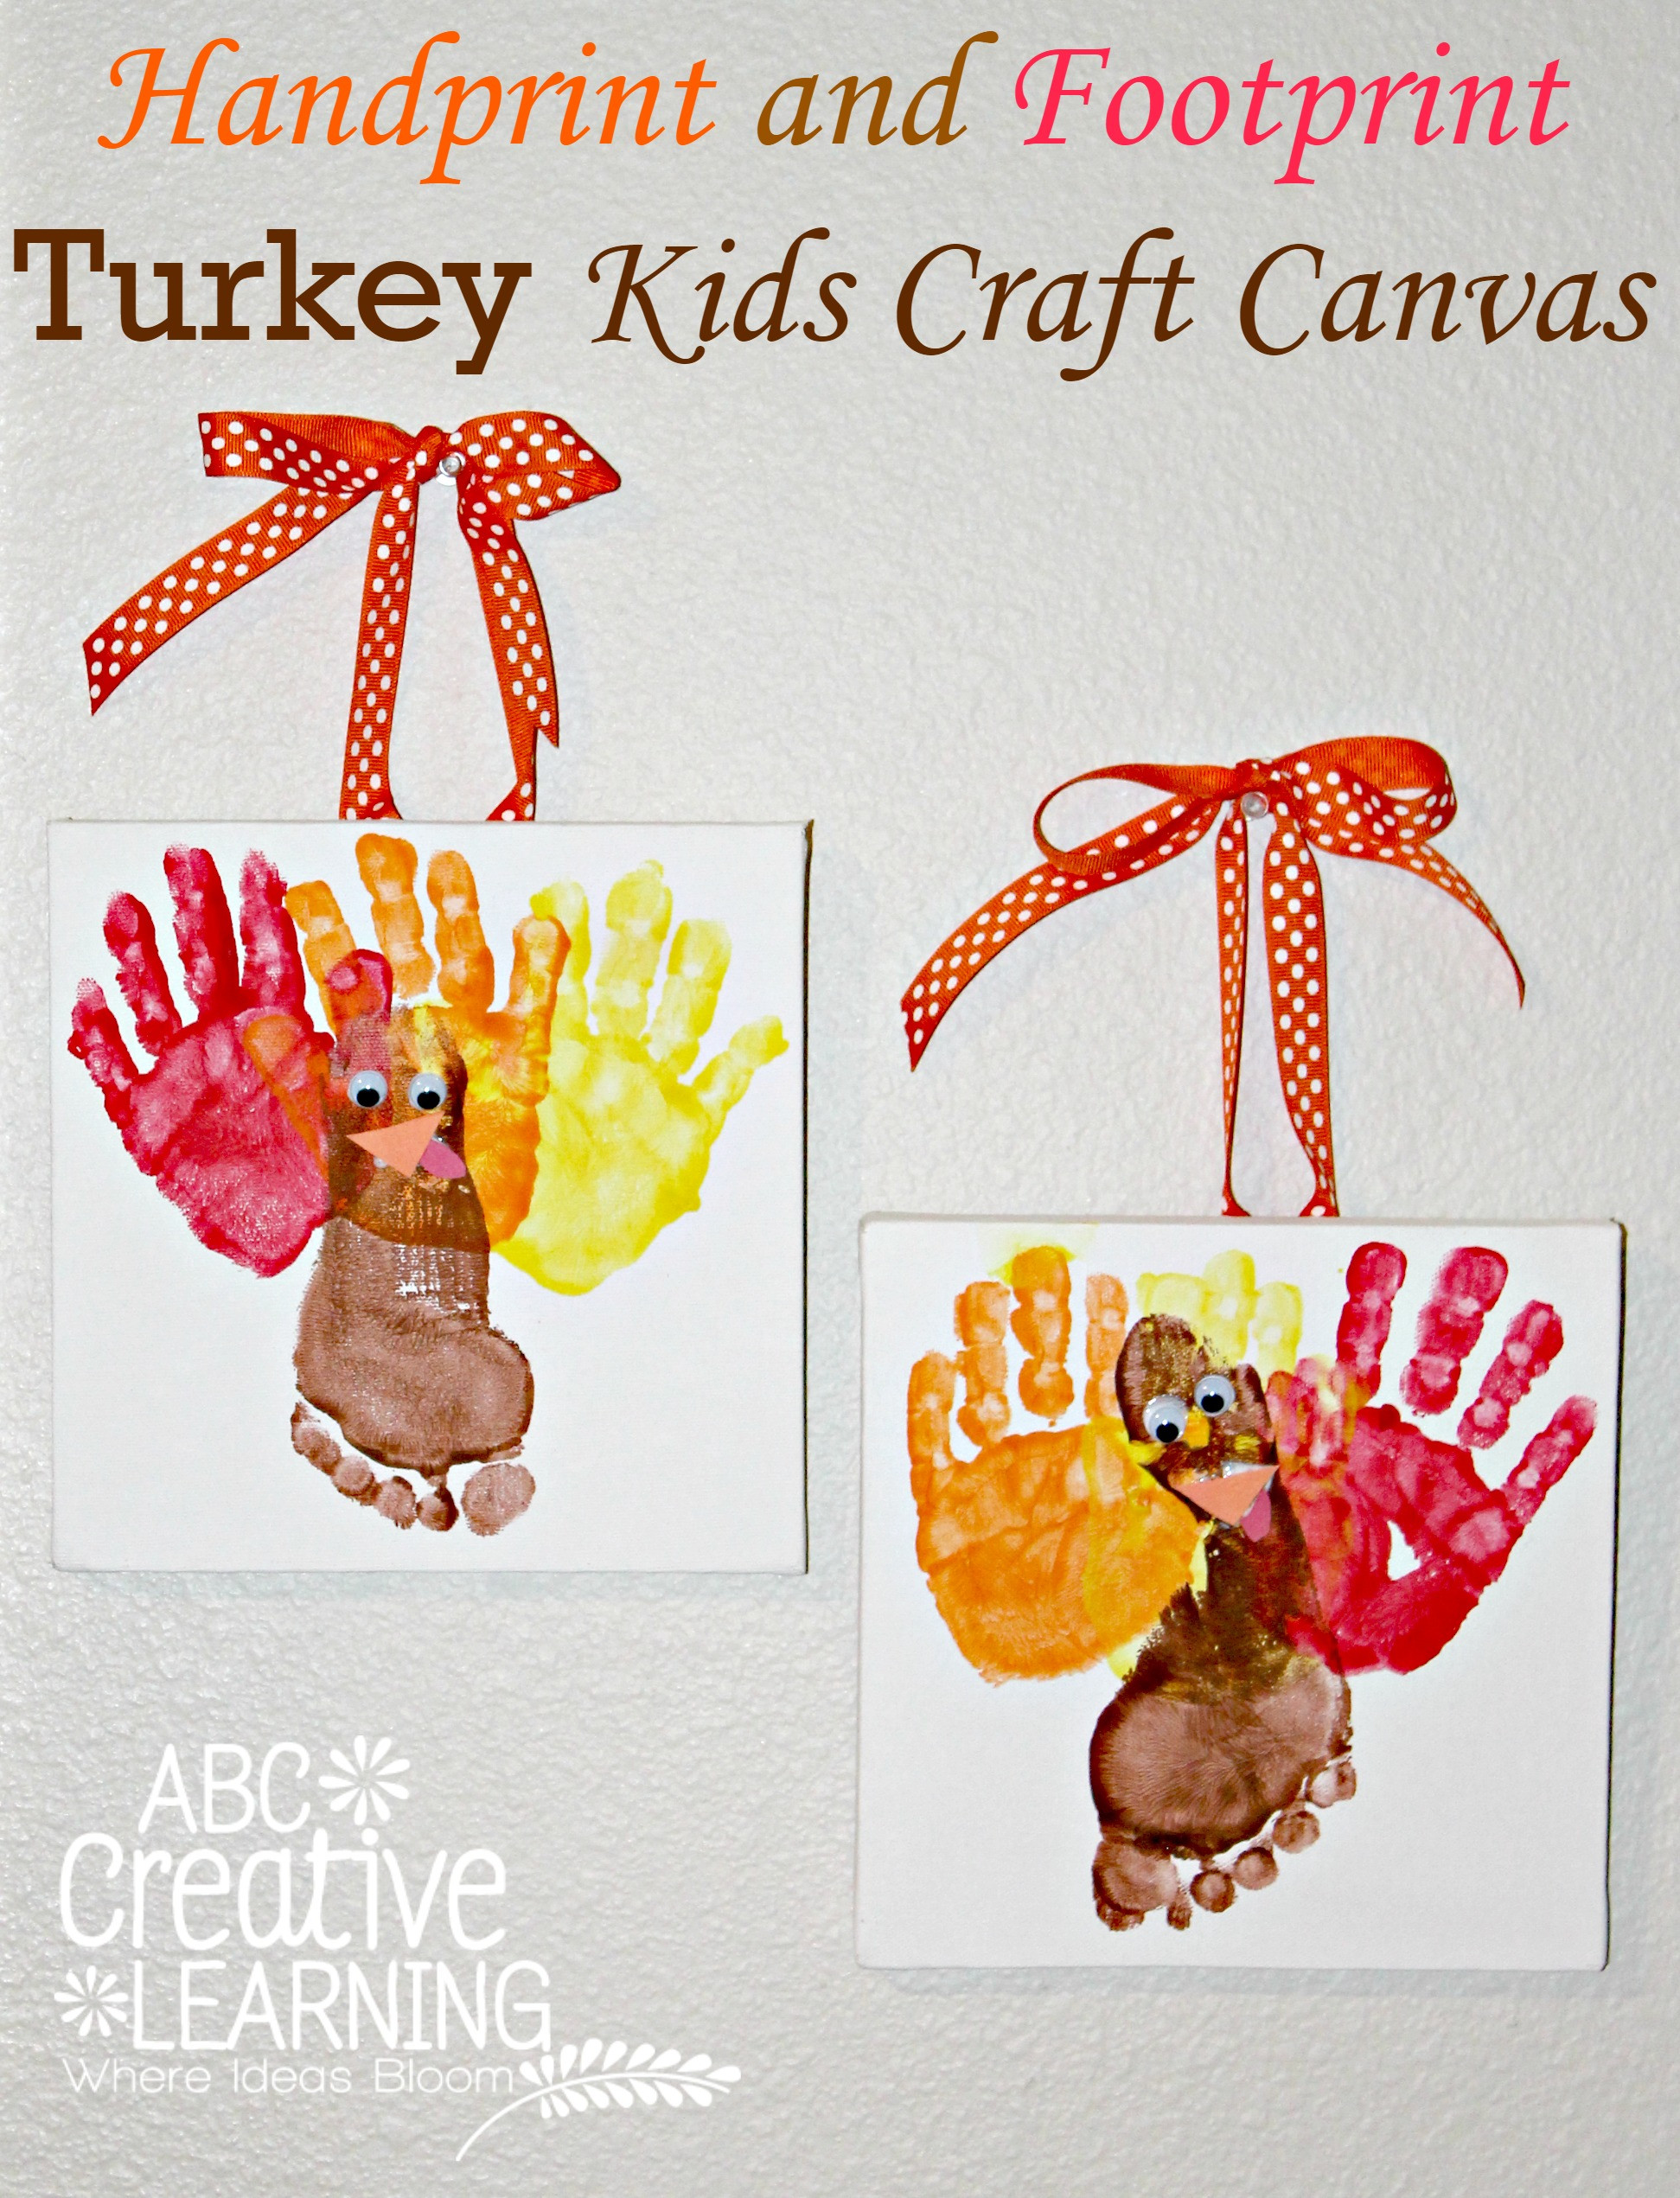 Canvas Crafts For Toddlers
 Handprint and Footprint Turkey Kids Craft Canvas